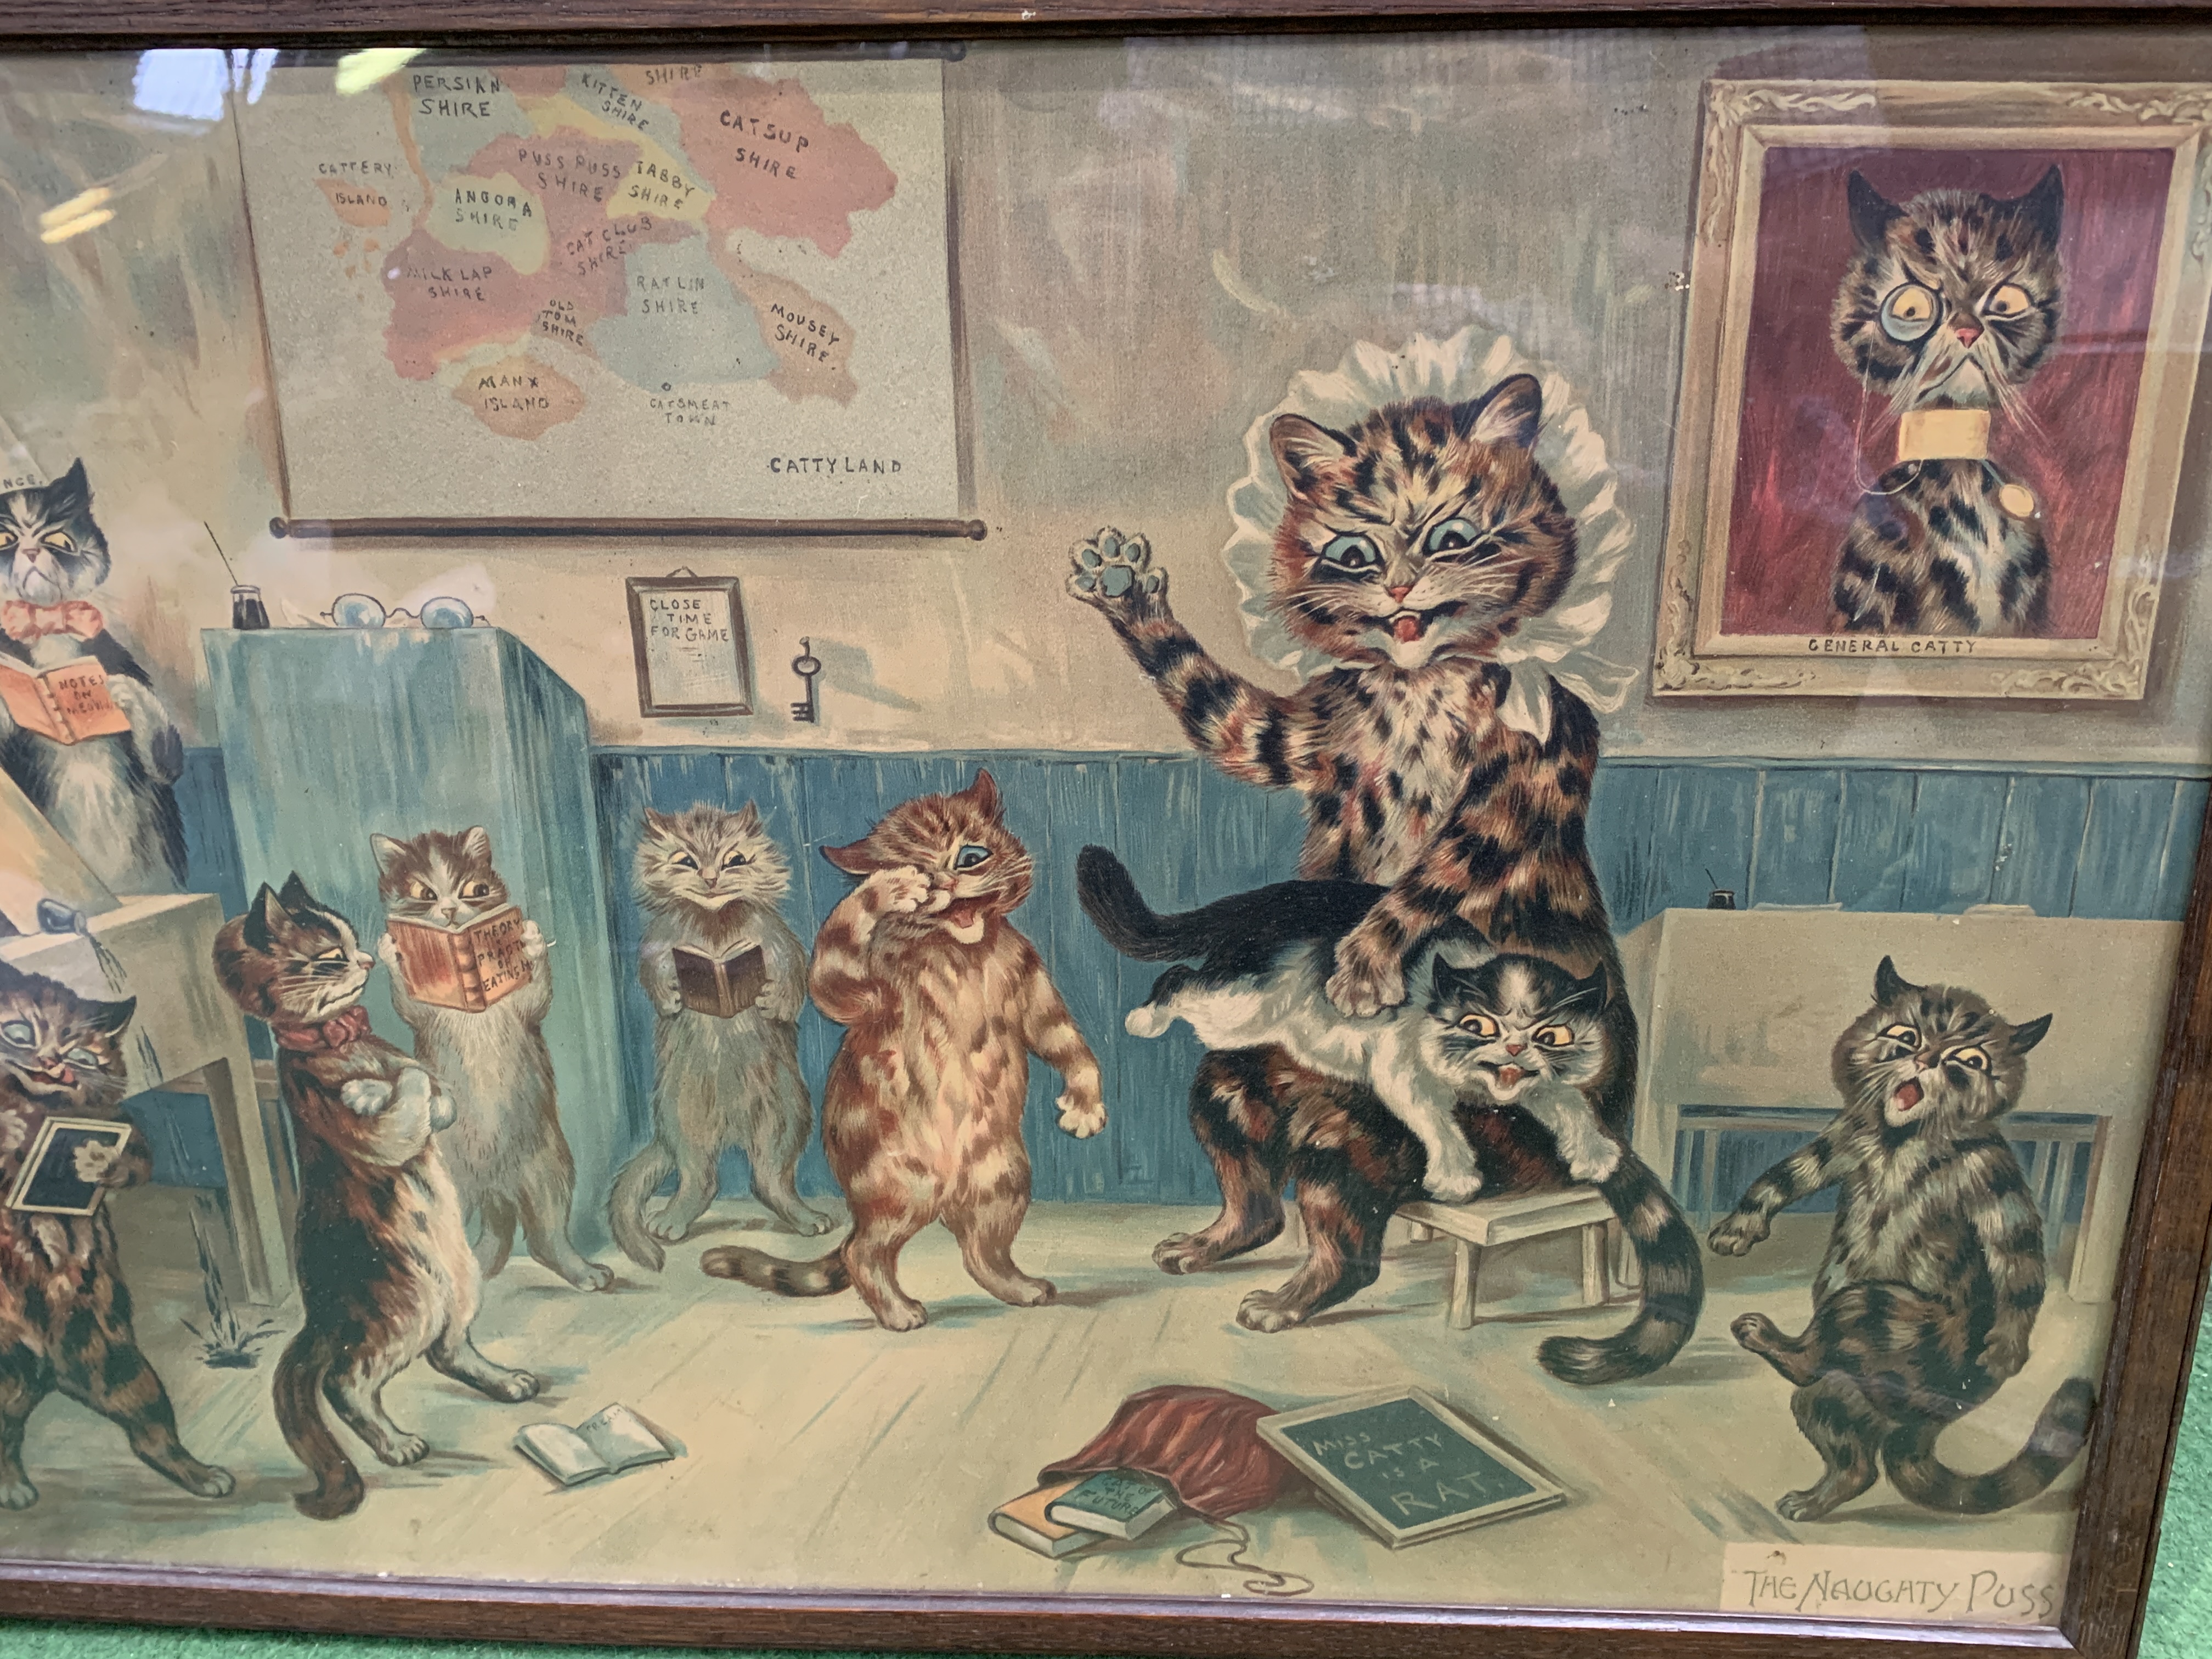 Framed and glazed Louis Wain print "The Naughty Puss" - Image 3 of 4